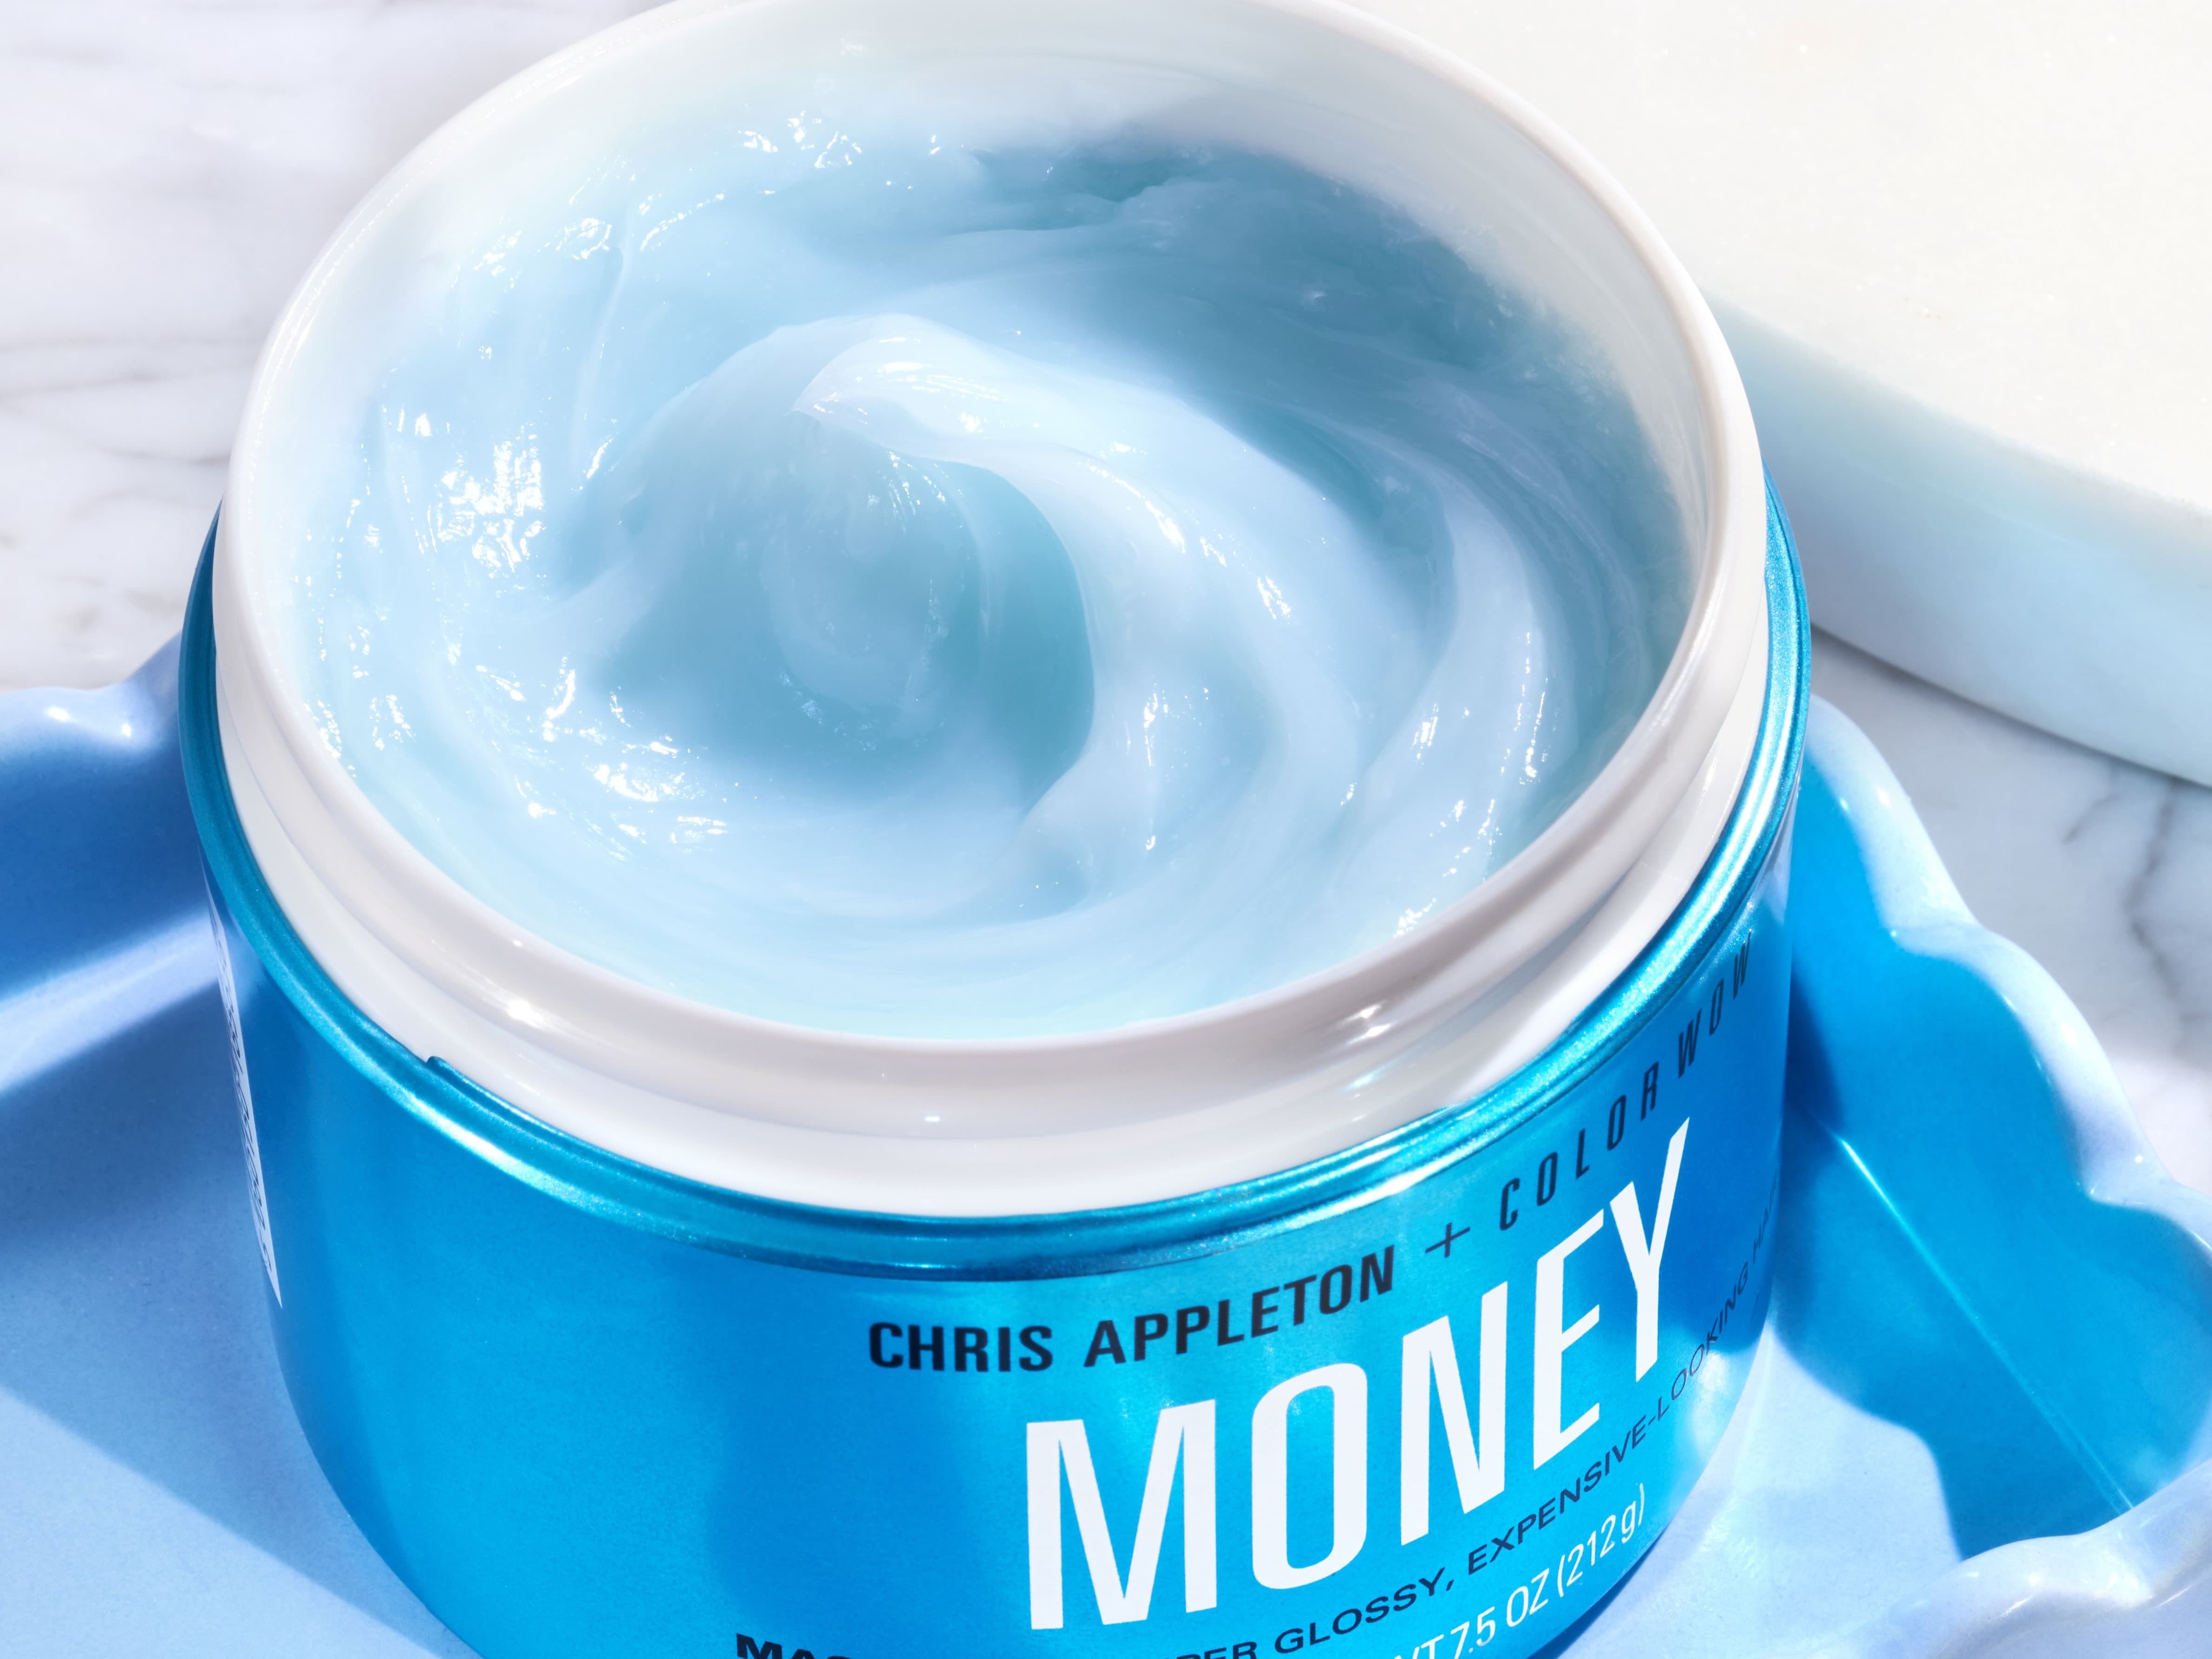 Color Wow Money Masque review | Space NK